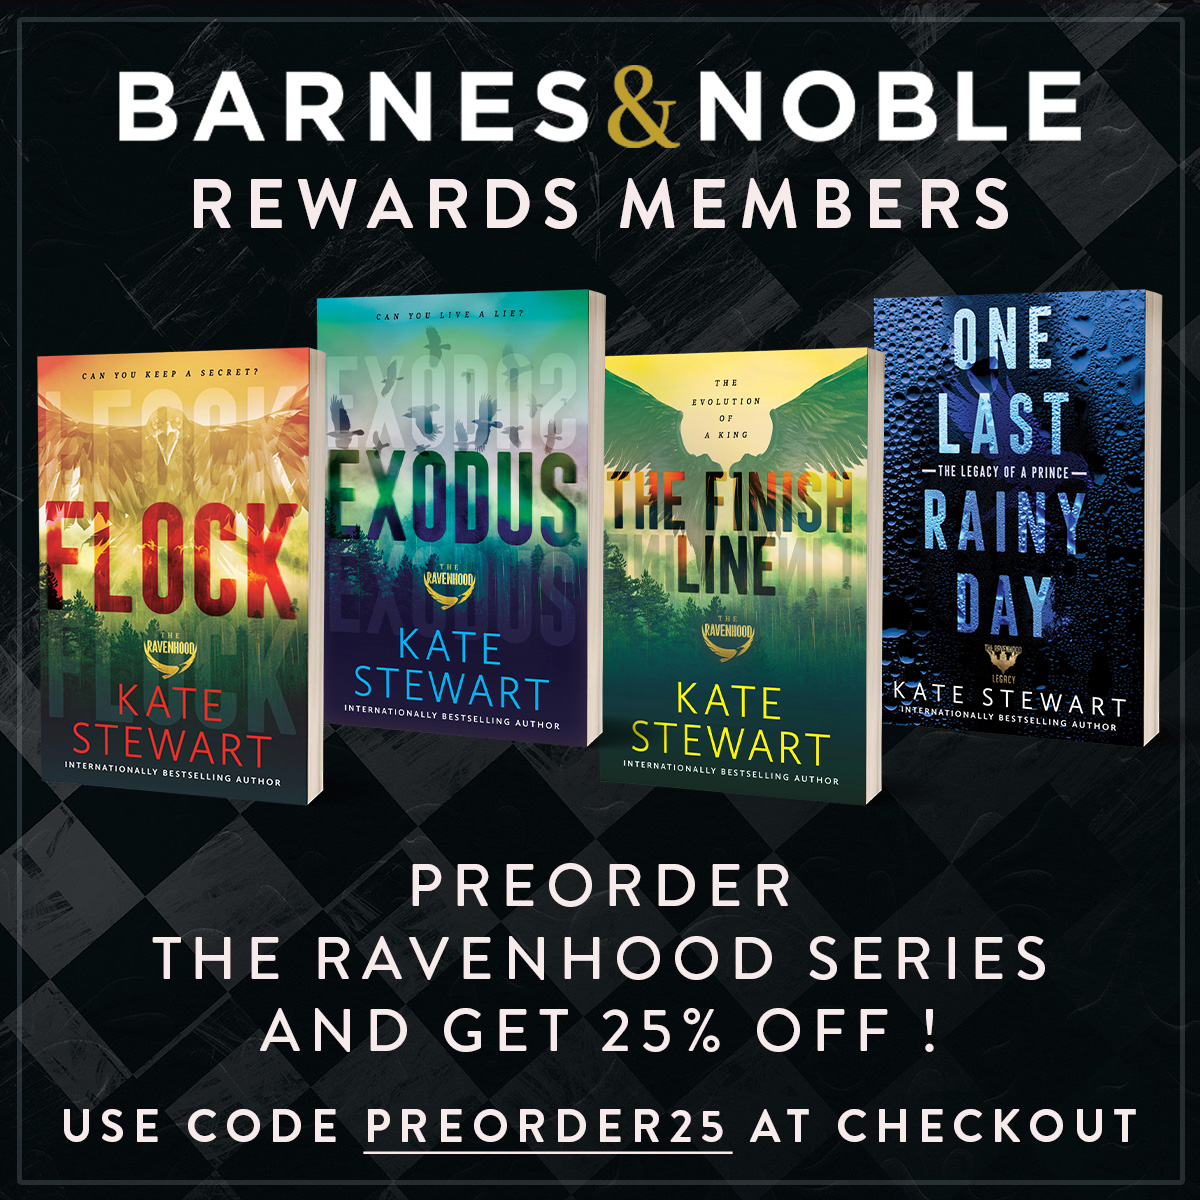 From now until April 19th, Barnes & Noble Rewards Members get 25% off (35% off for Premium Members!) all pre-orders—including the Kensington editions of The Ravenhood and Legacy series! ✨ Preorder here → geni.us/RavenhoodBN ✨ Use code 𝐏𝐑𝐄𝐎𝐑𝐃𝐄𝐑𝟐𝟓 at checkout